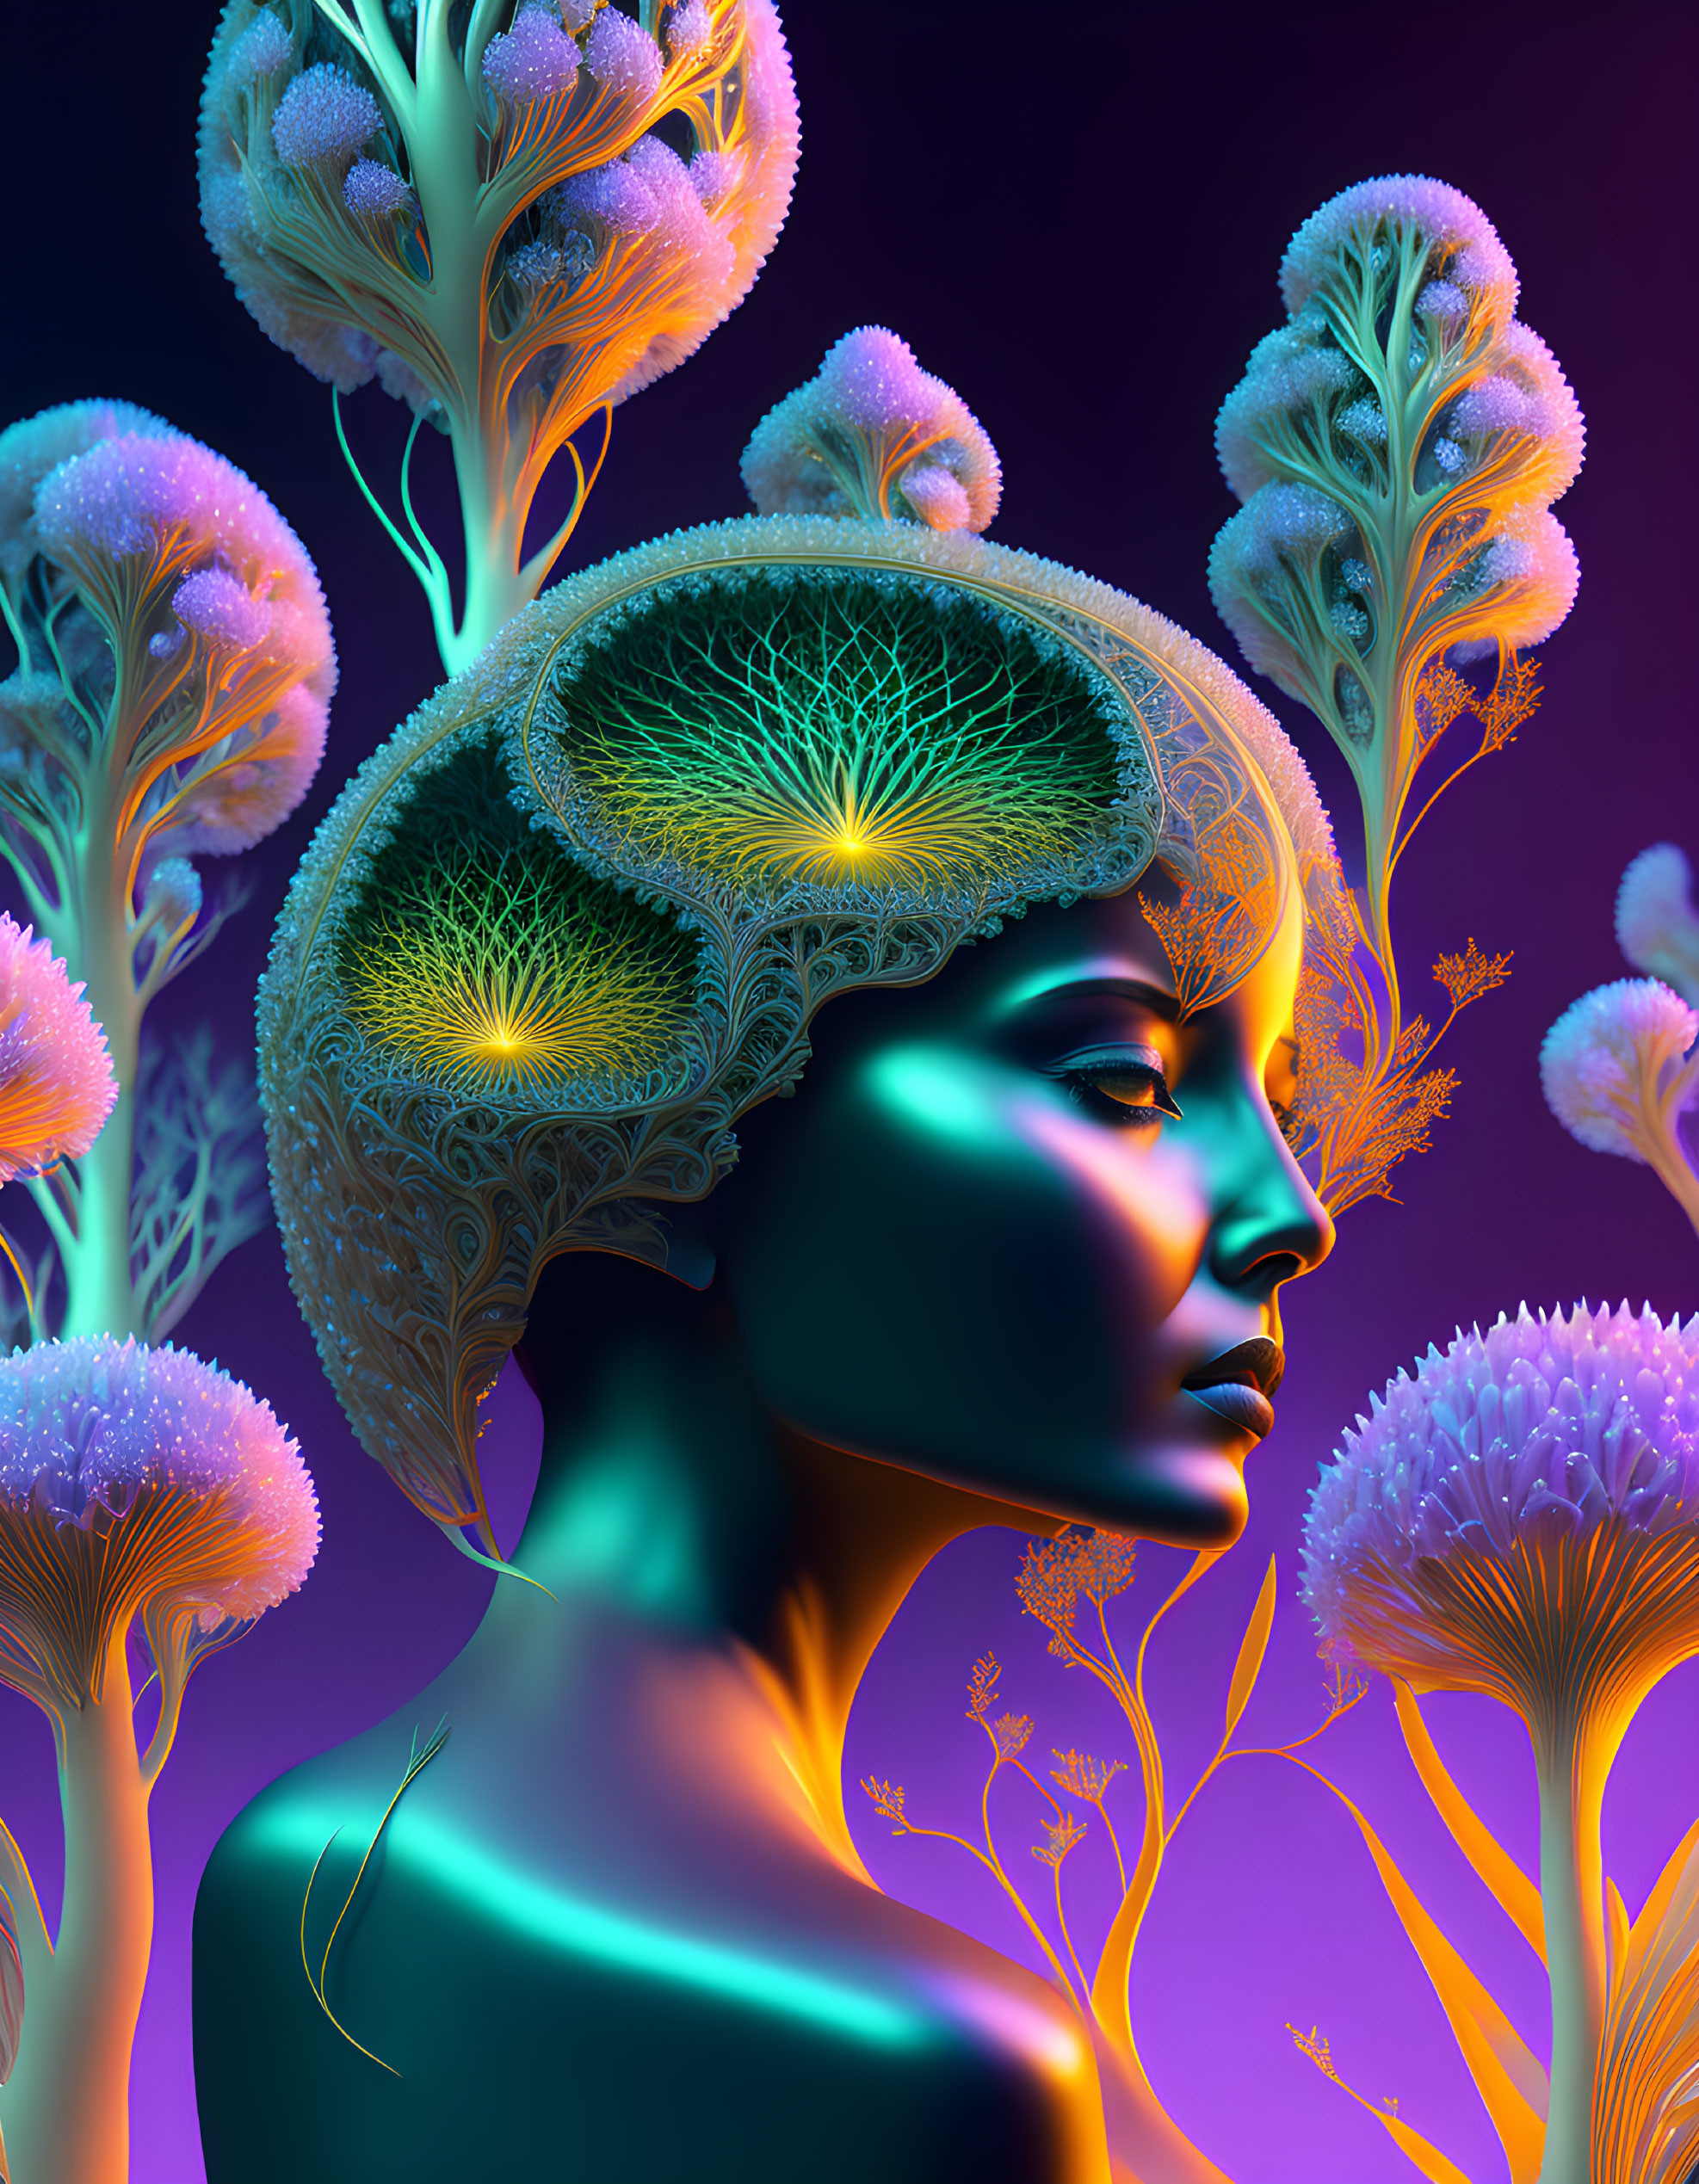 Digital artwork features woman with glowing, tree-like brain structure and neon-hued plant forms on purple background